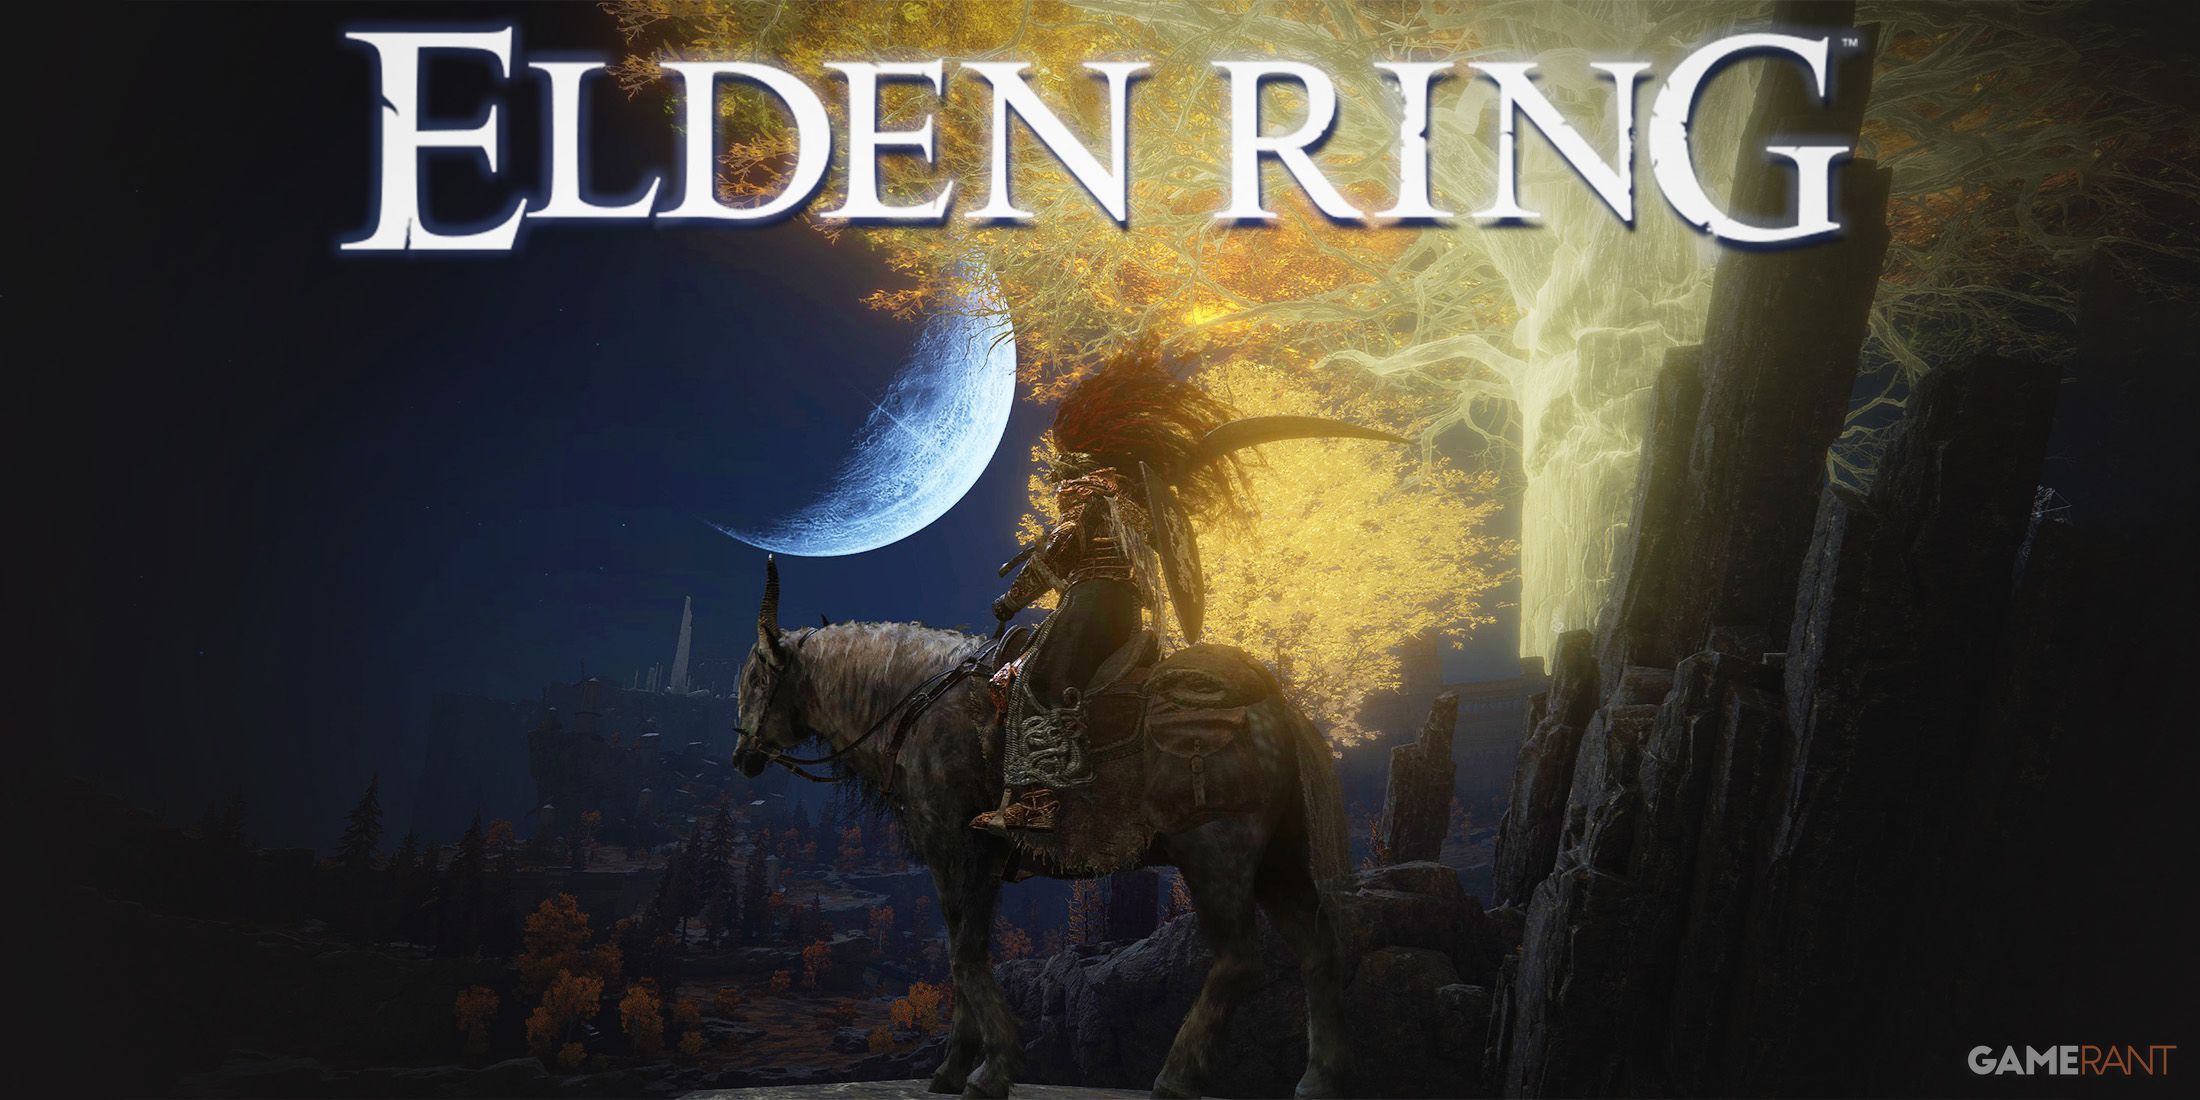 Elden Ring Moonfolk Ruins Erdtree view Tarnished on Torrent with game logo